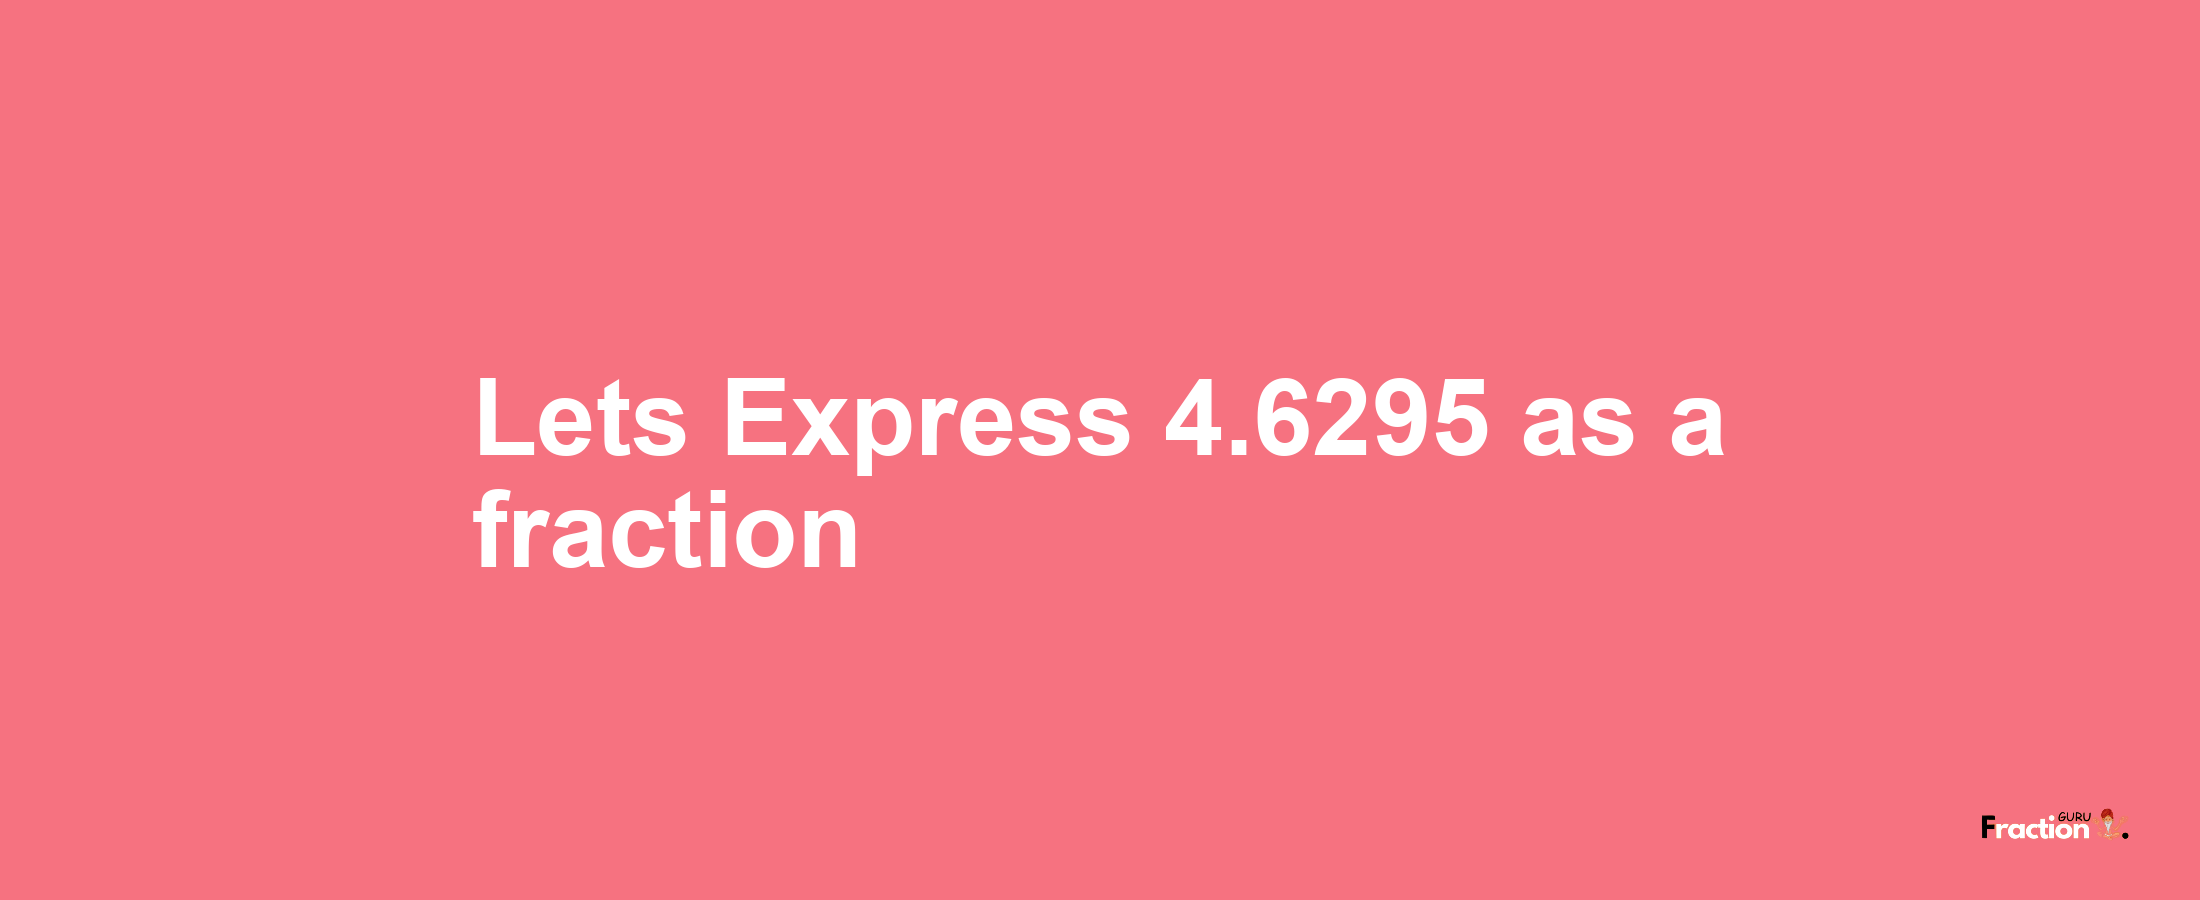 Lets Express 4.6295 as afraction